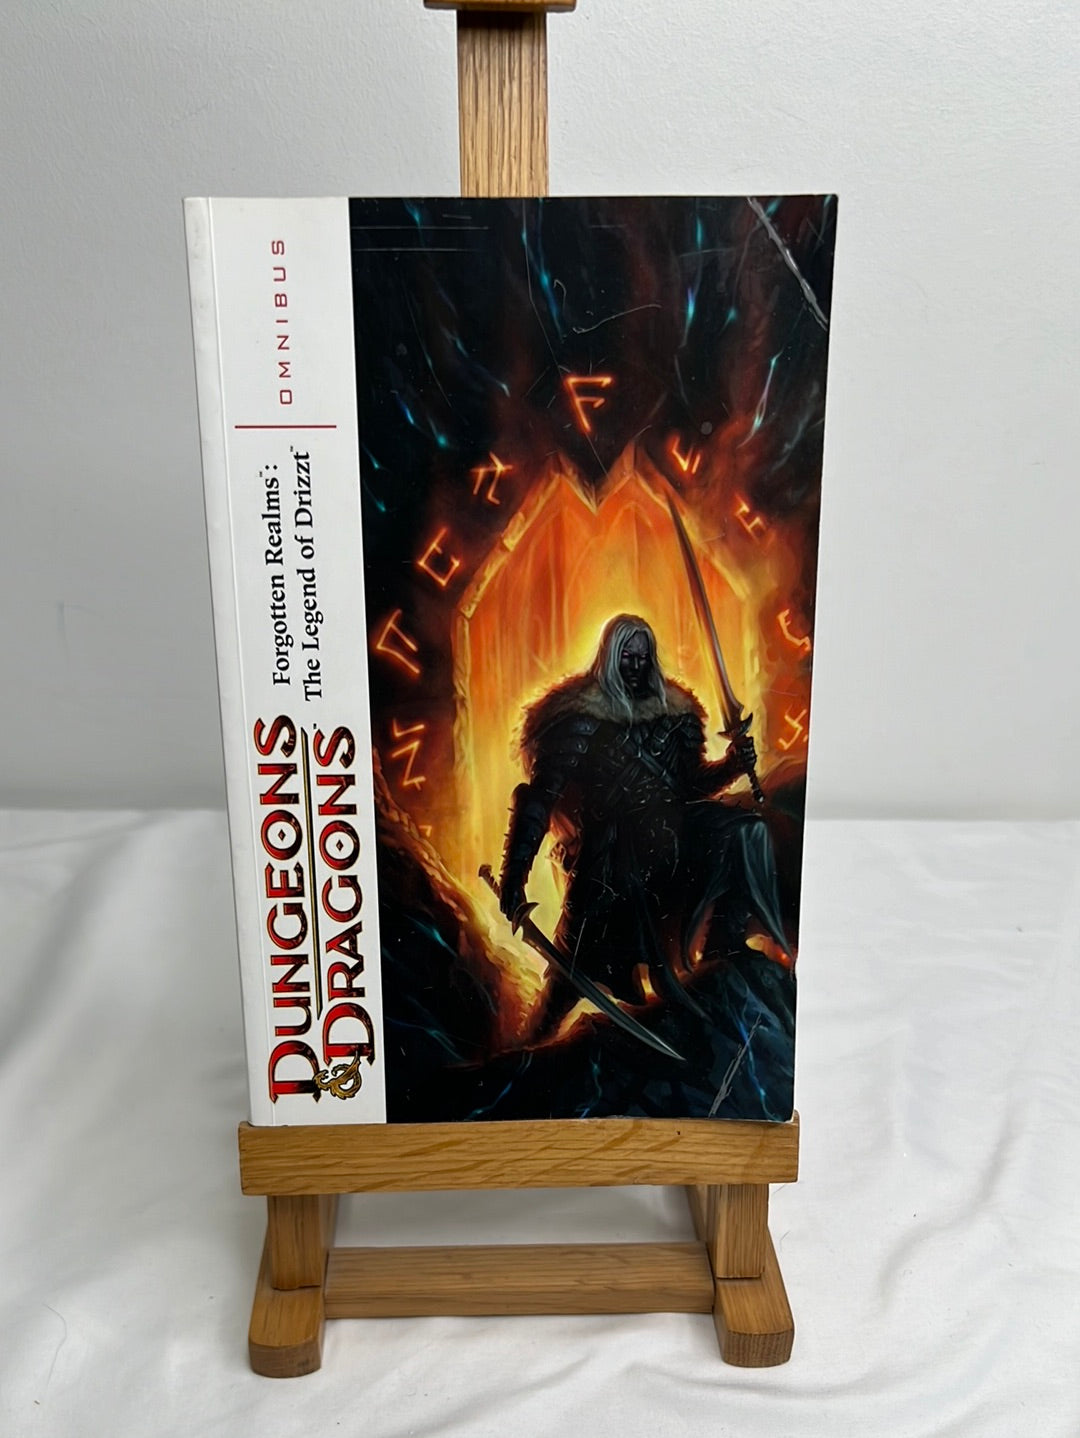 Dungeons and Dragons Forotten Realms: The Lengend of Drizzt Omnibus Volume 1